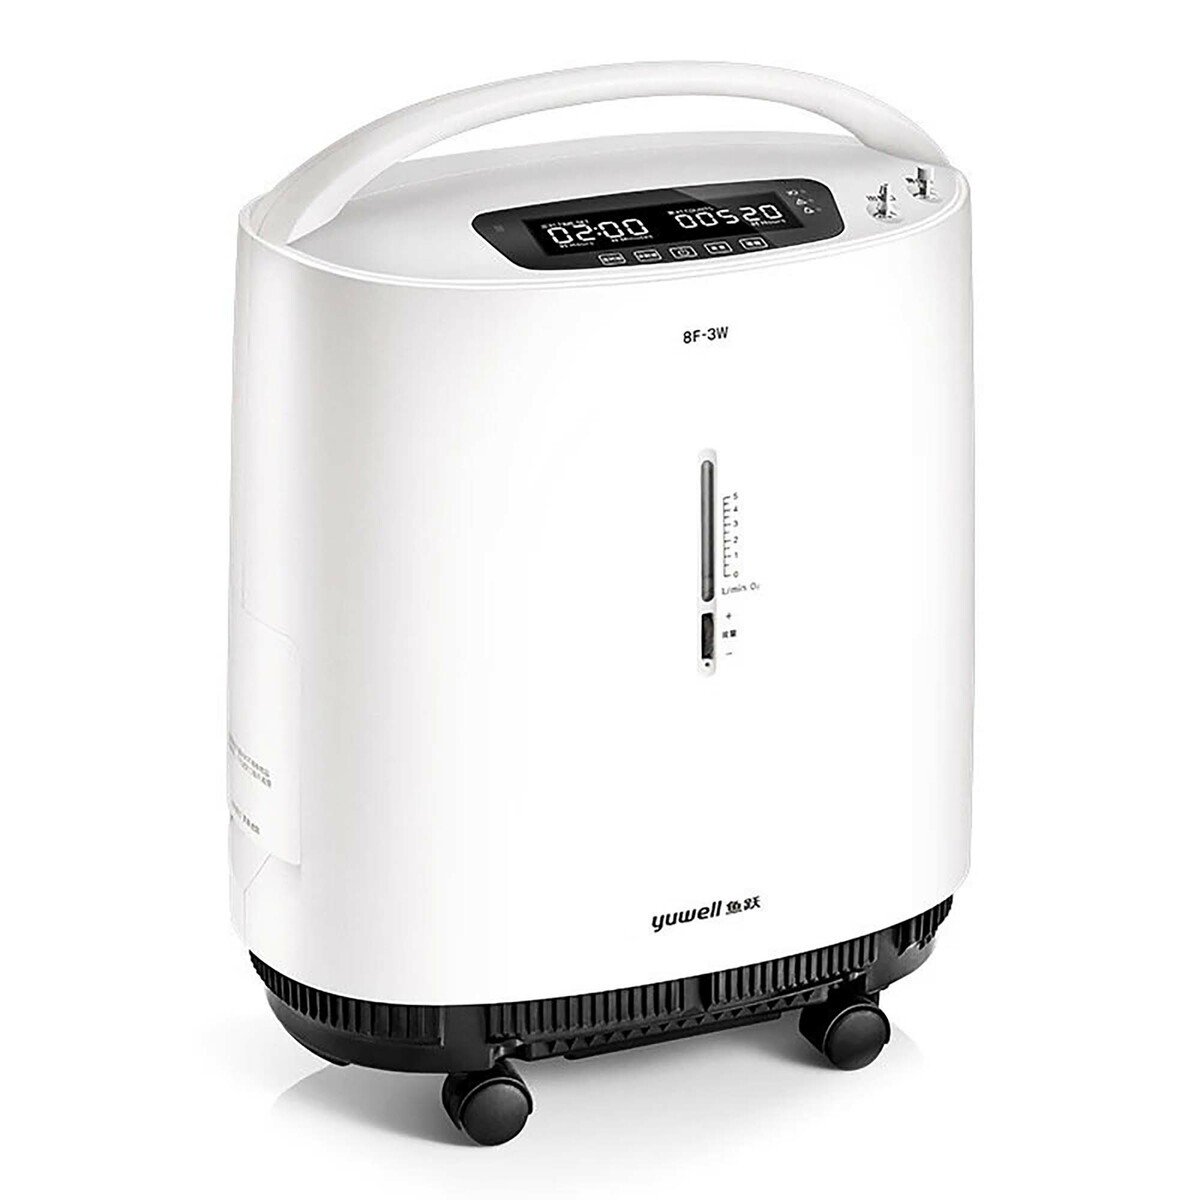 Yuwell Oxygen Concentrator 8F-5AW 5L